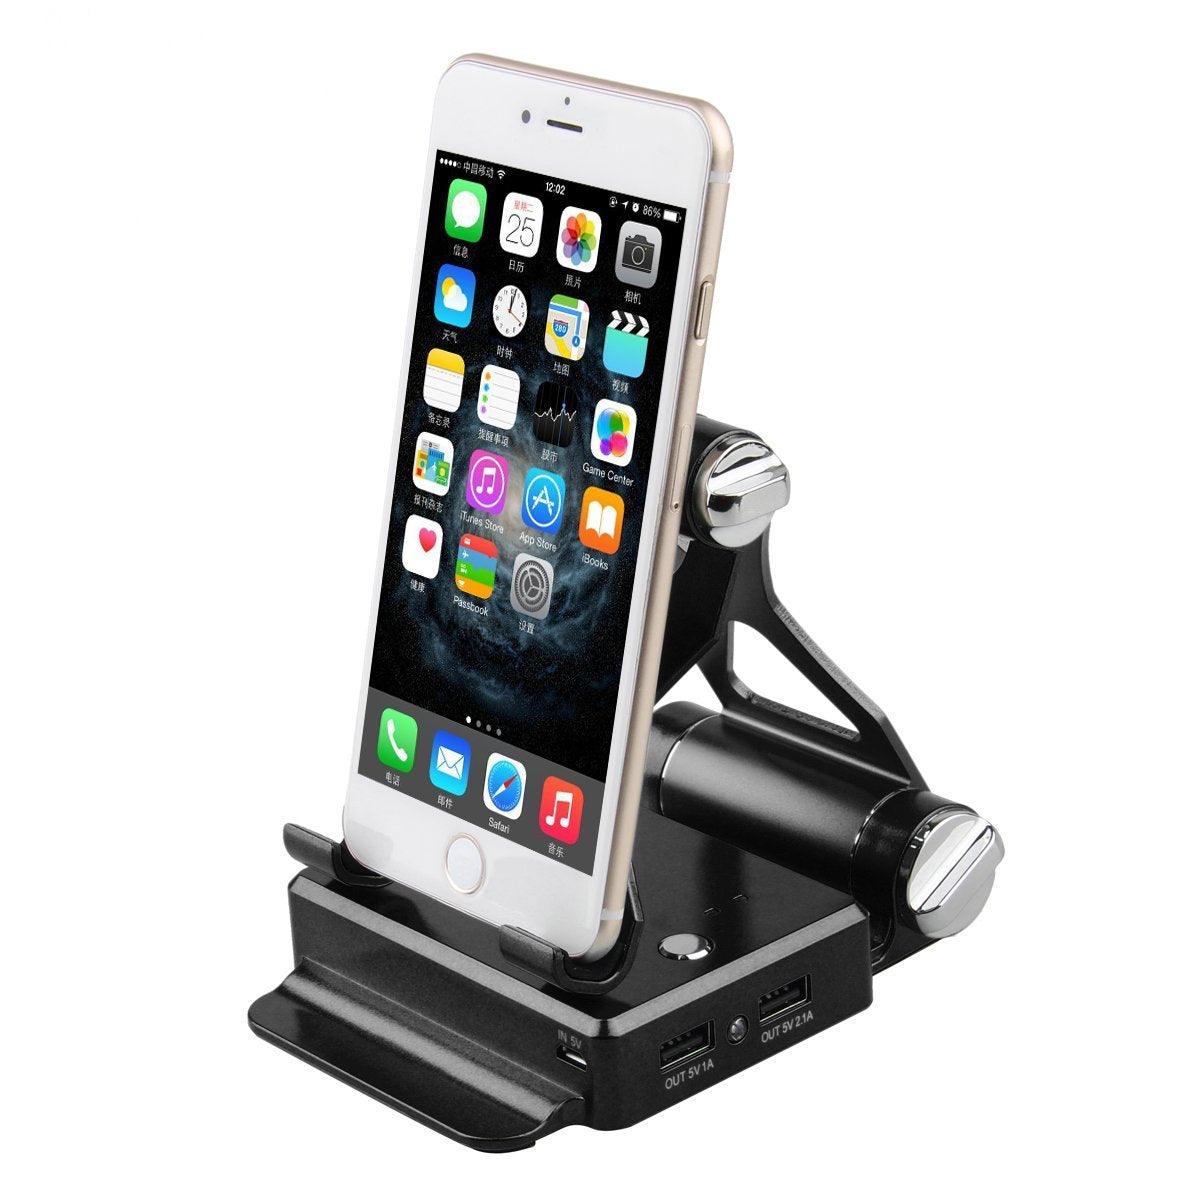 Podium Style Stand With Extended Battery Up To 200% For iPad, iPhone - Ash Boutique